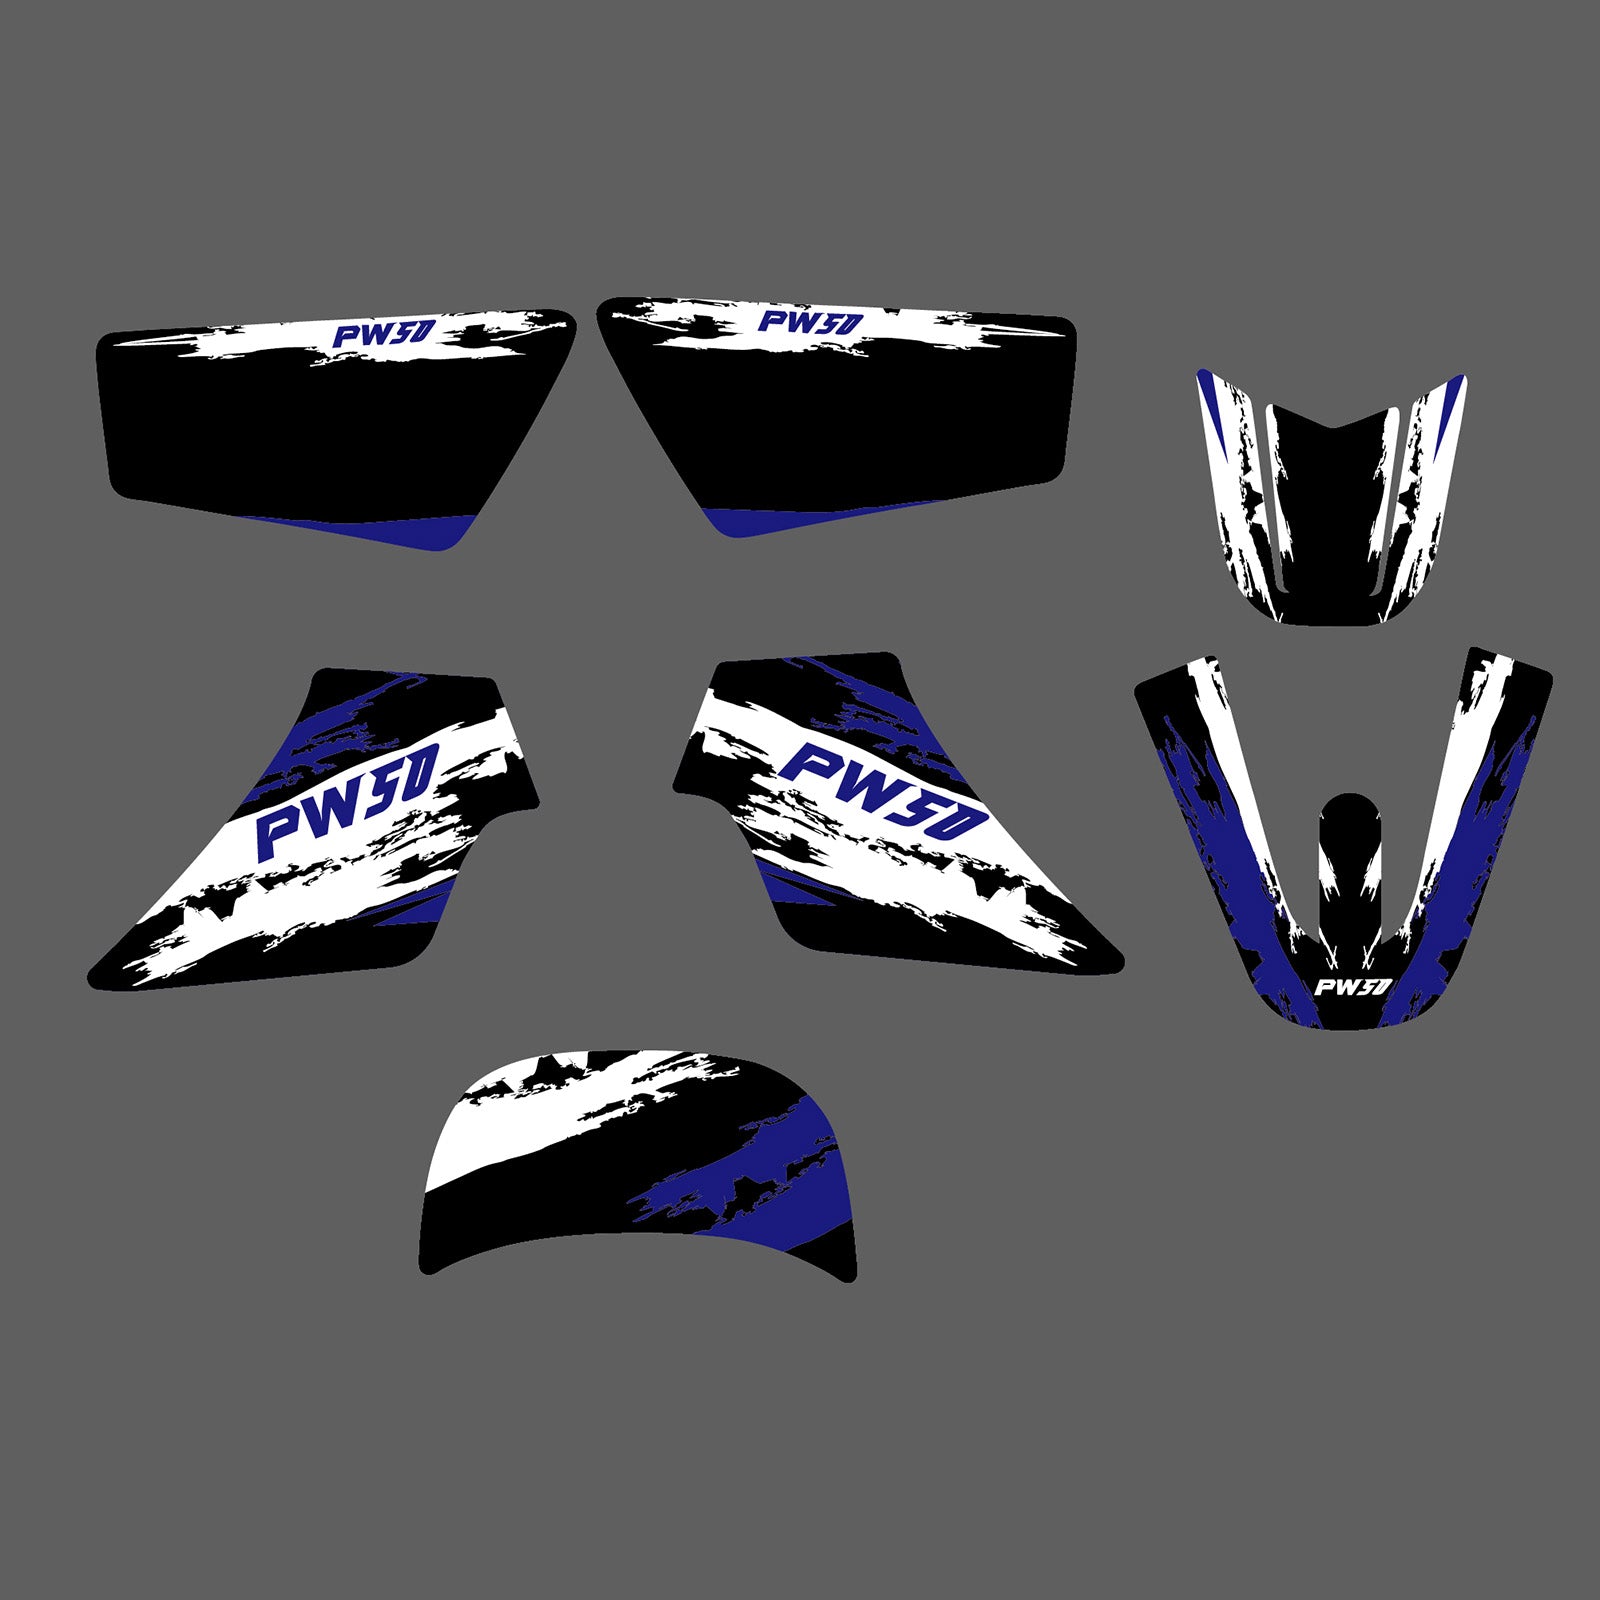 Motorcycle Team Full Graphics Background Sticker Decal Kits For YAMAHA PW50 ALL YEARS